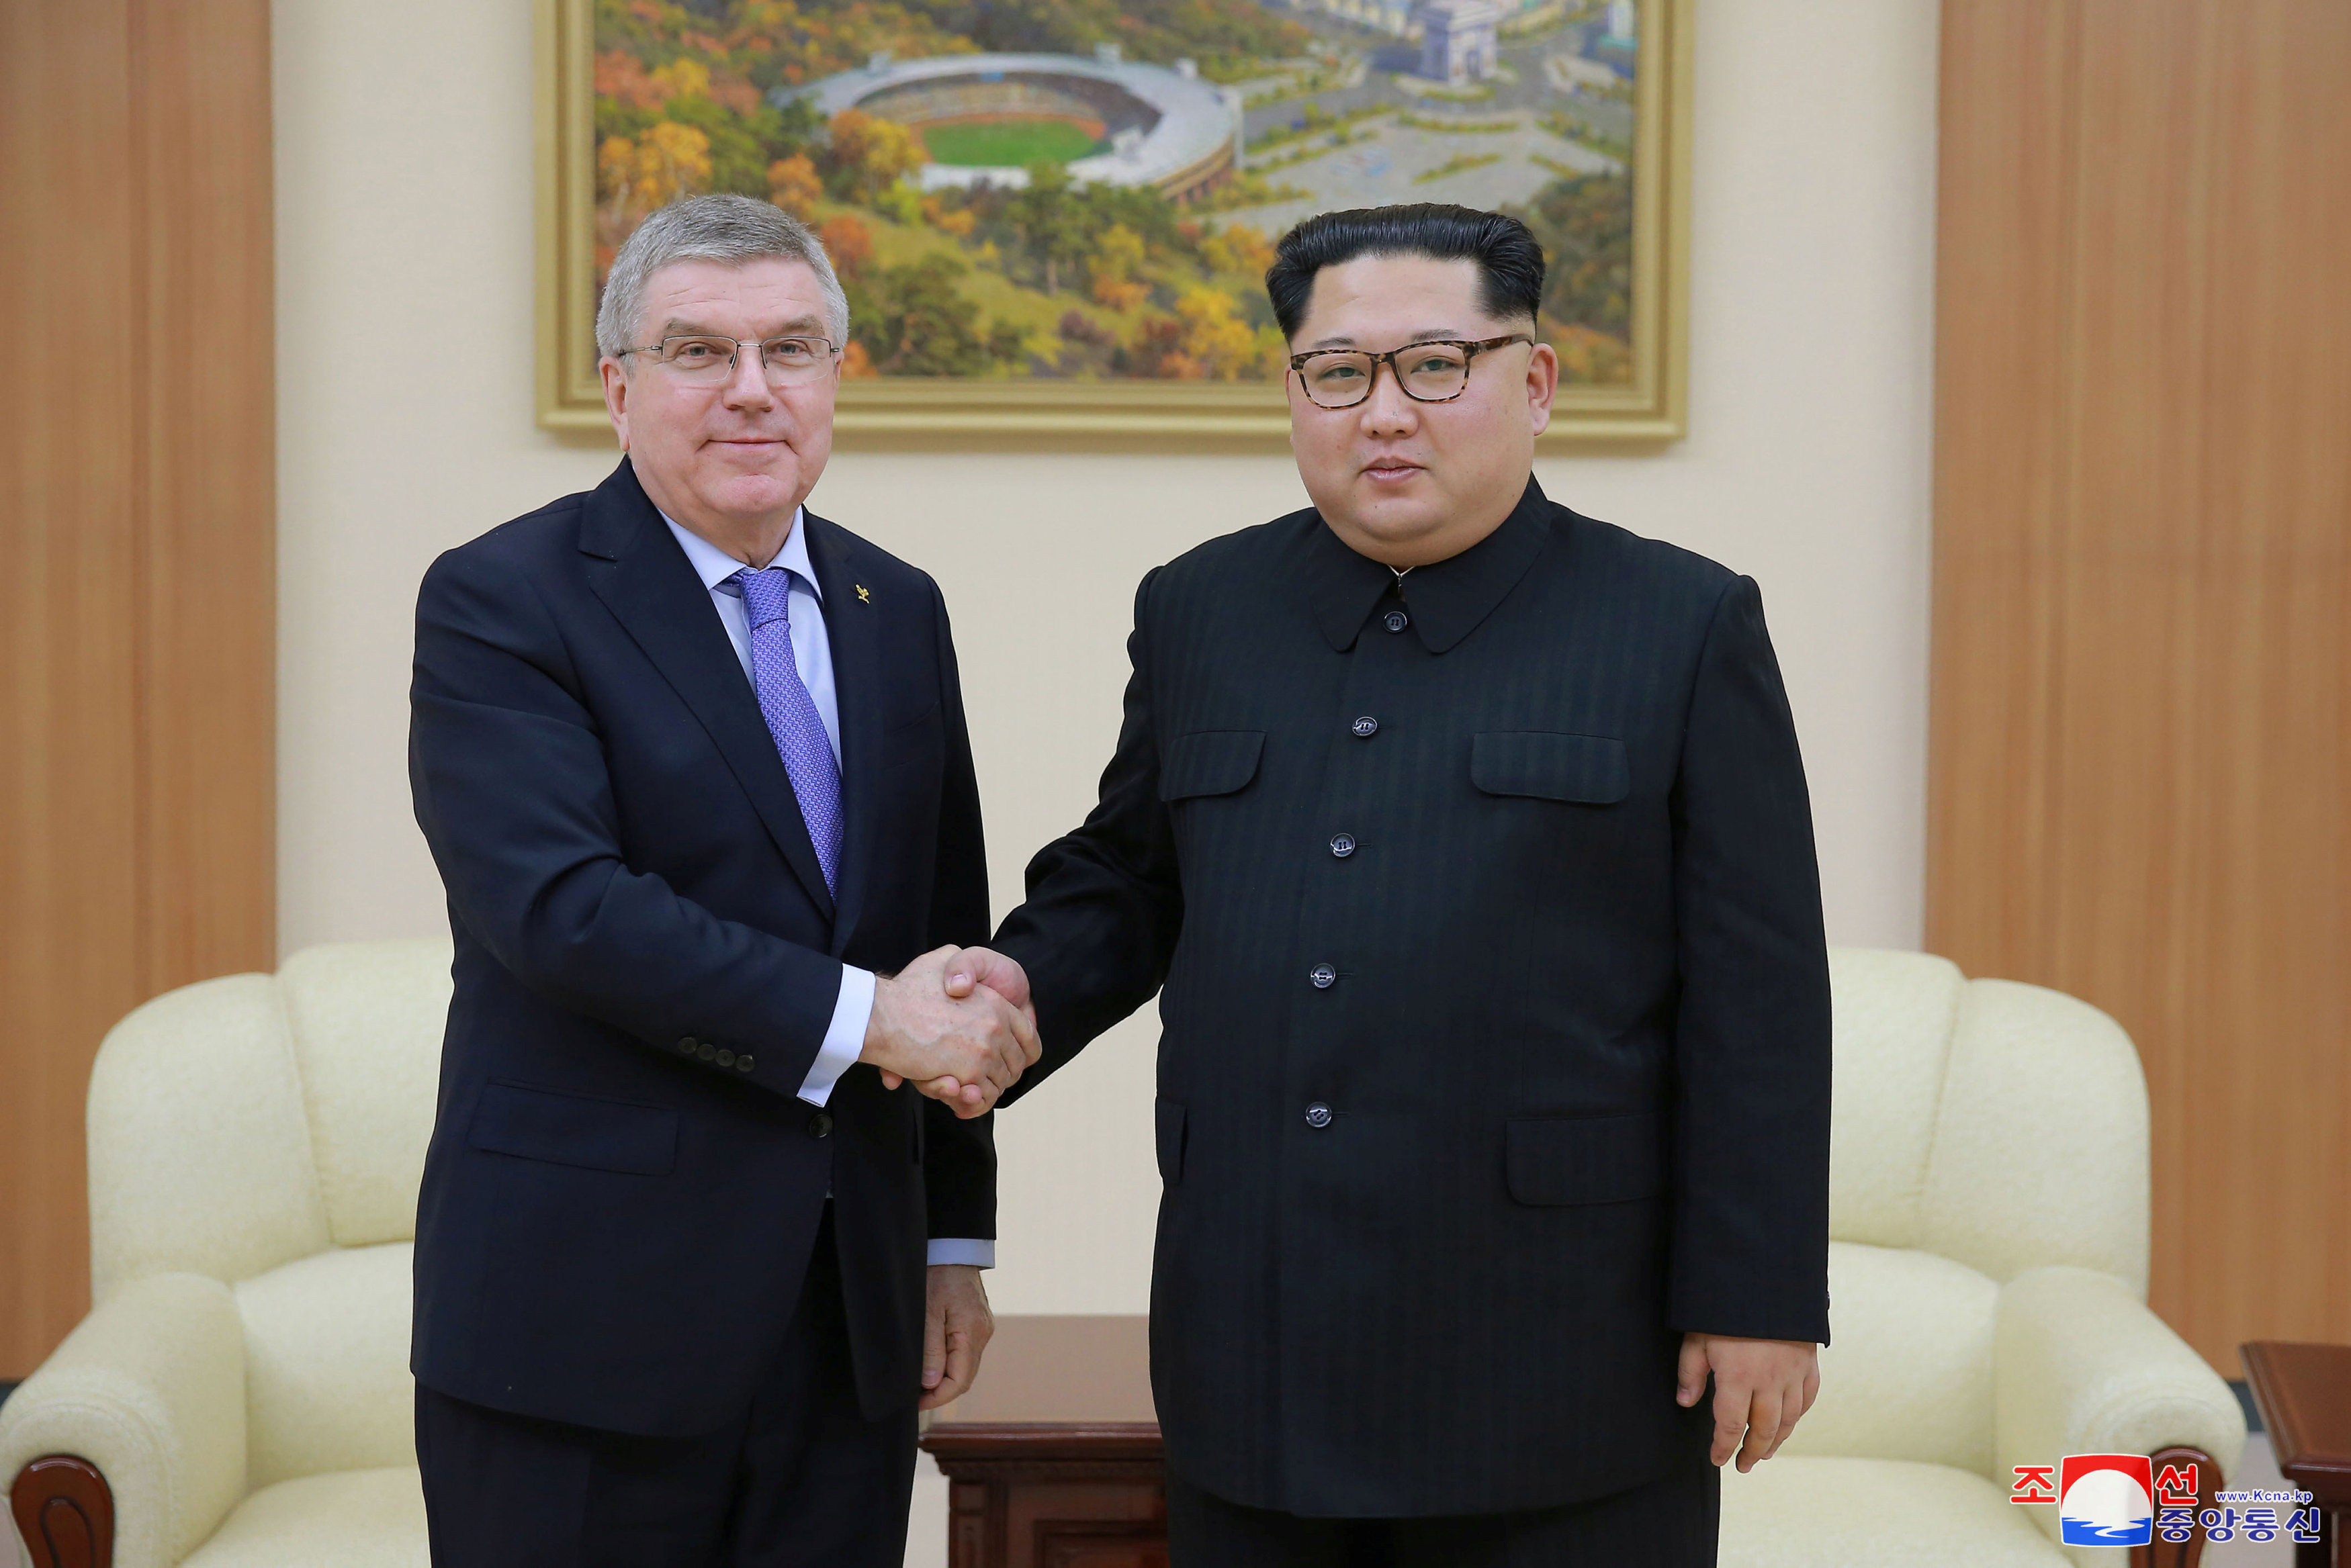 N.Korea will take part in next two Olympics - IOC chief Bach